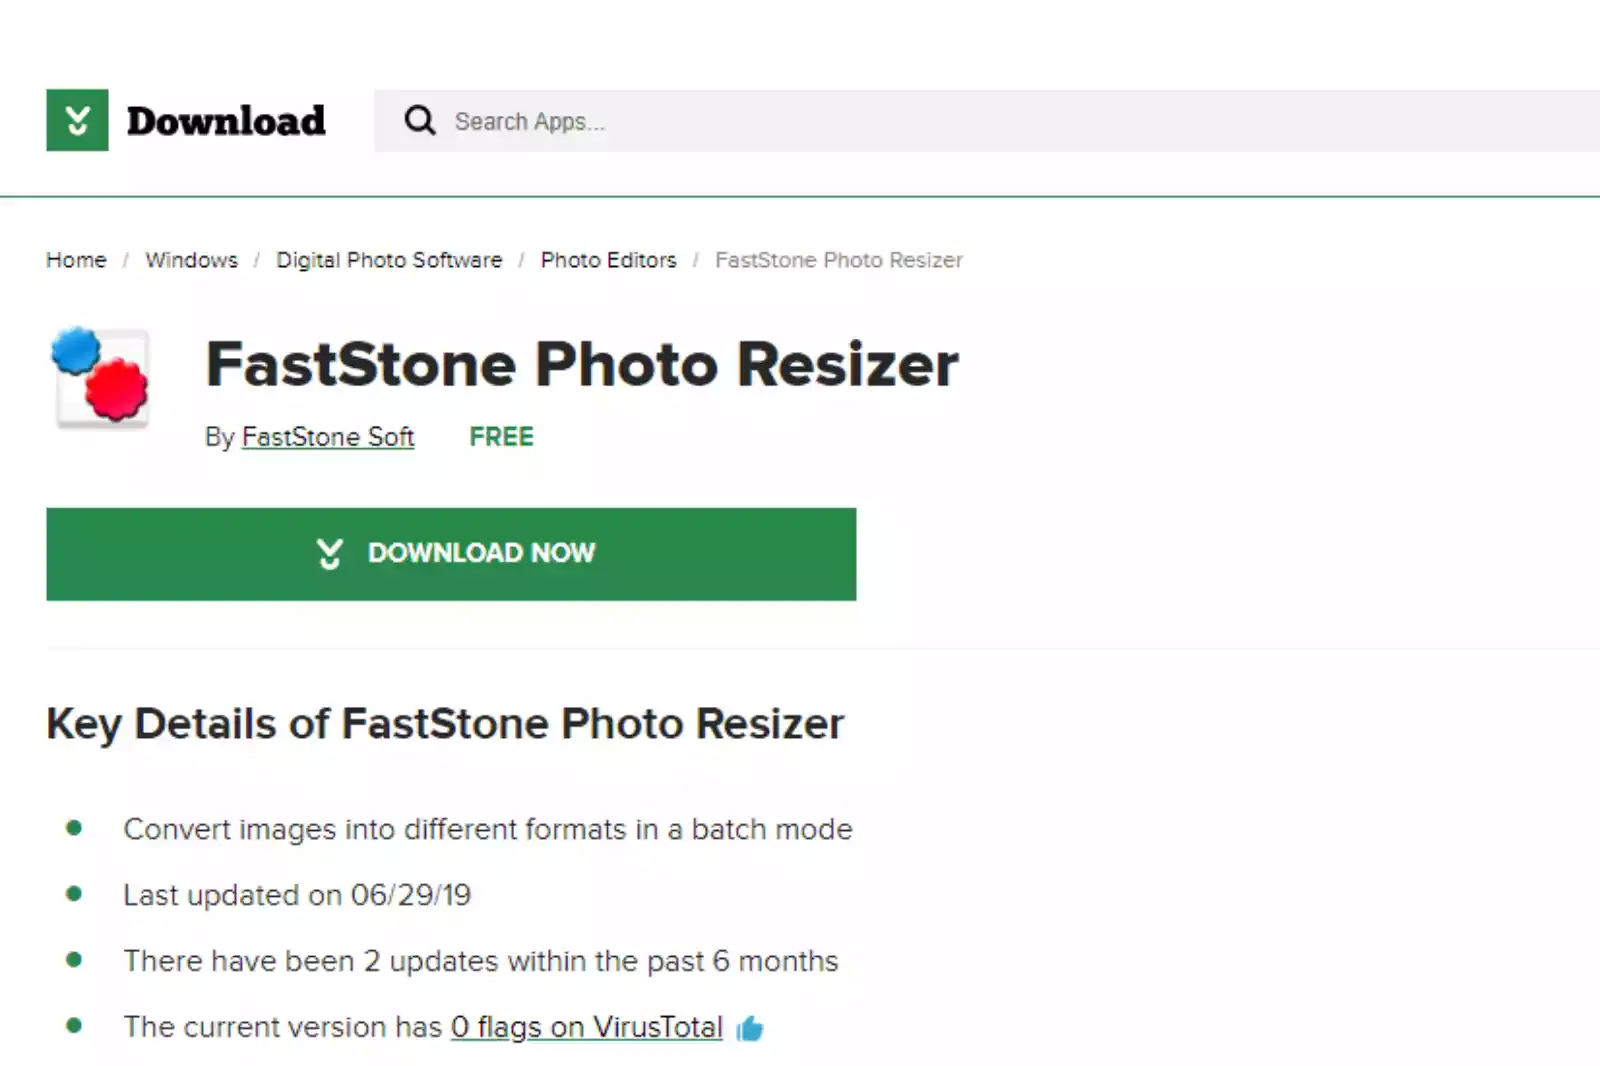 Home Page of FastStone Photo Resizer